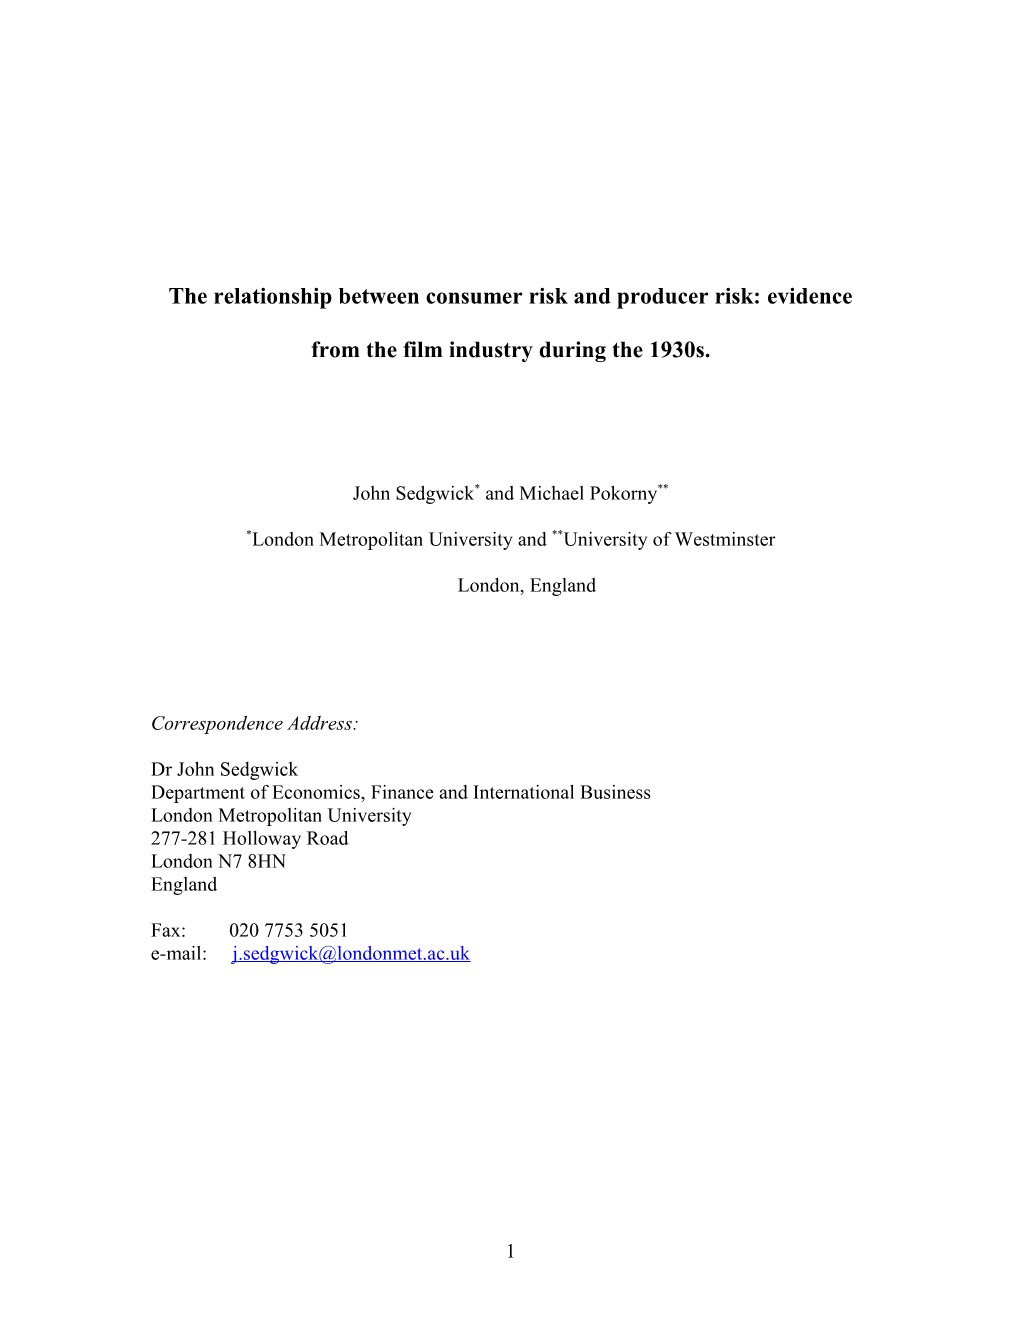 The Relationship Between Consumer Risk and Producer Risk: Evidence from the Film Industry